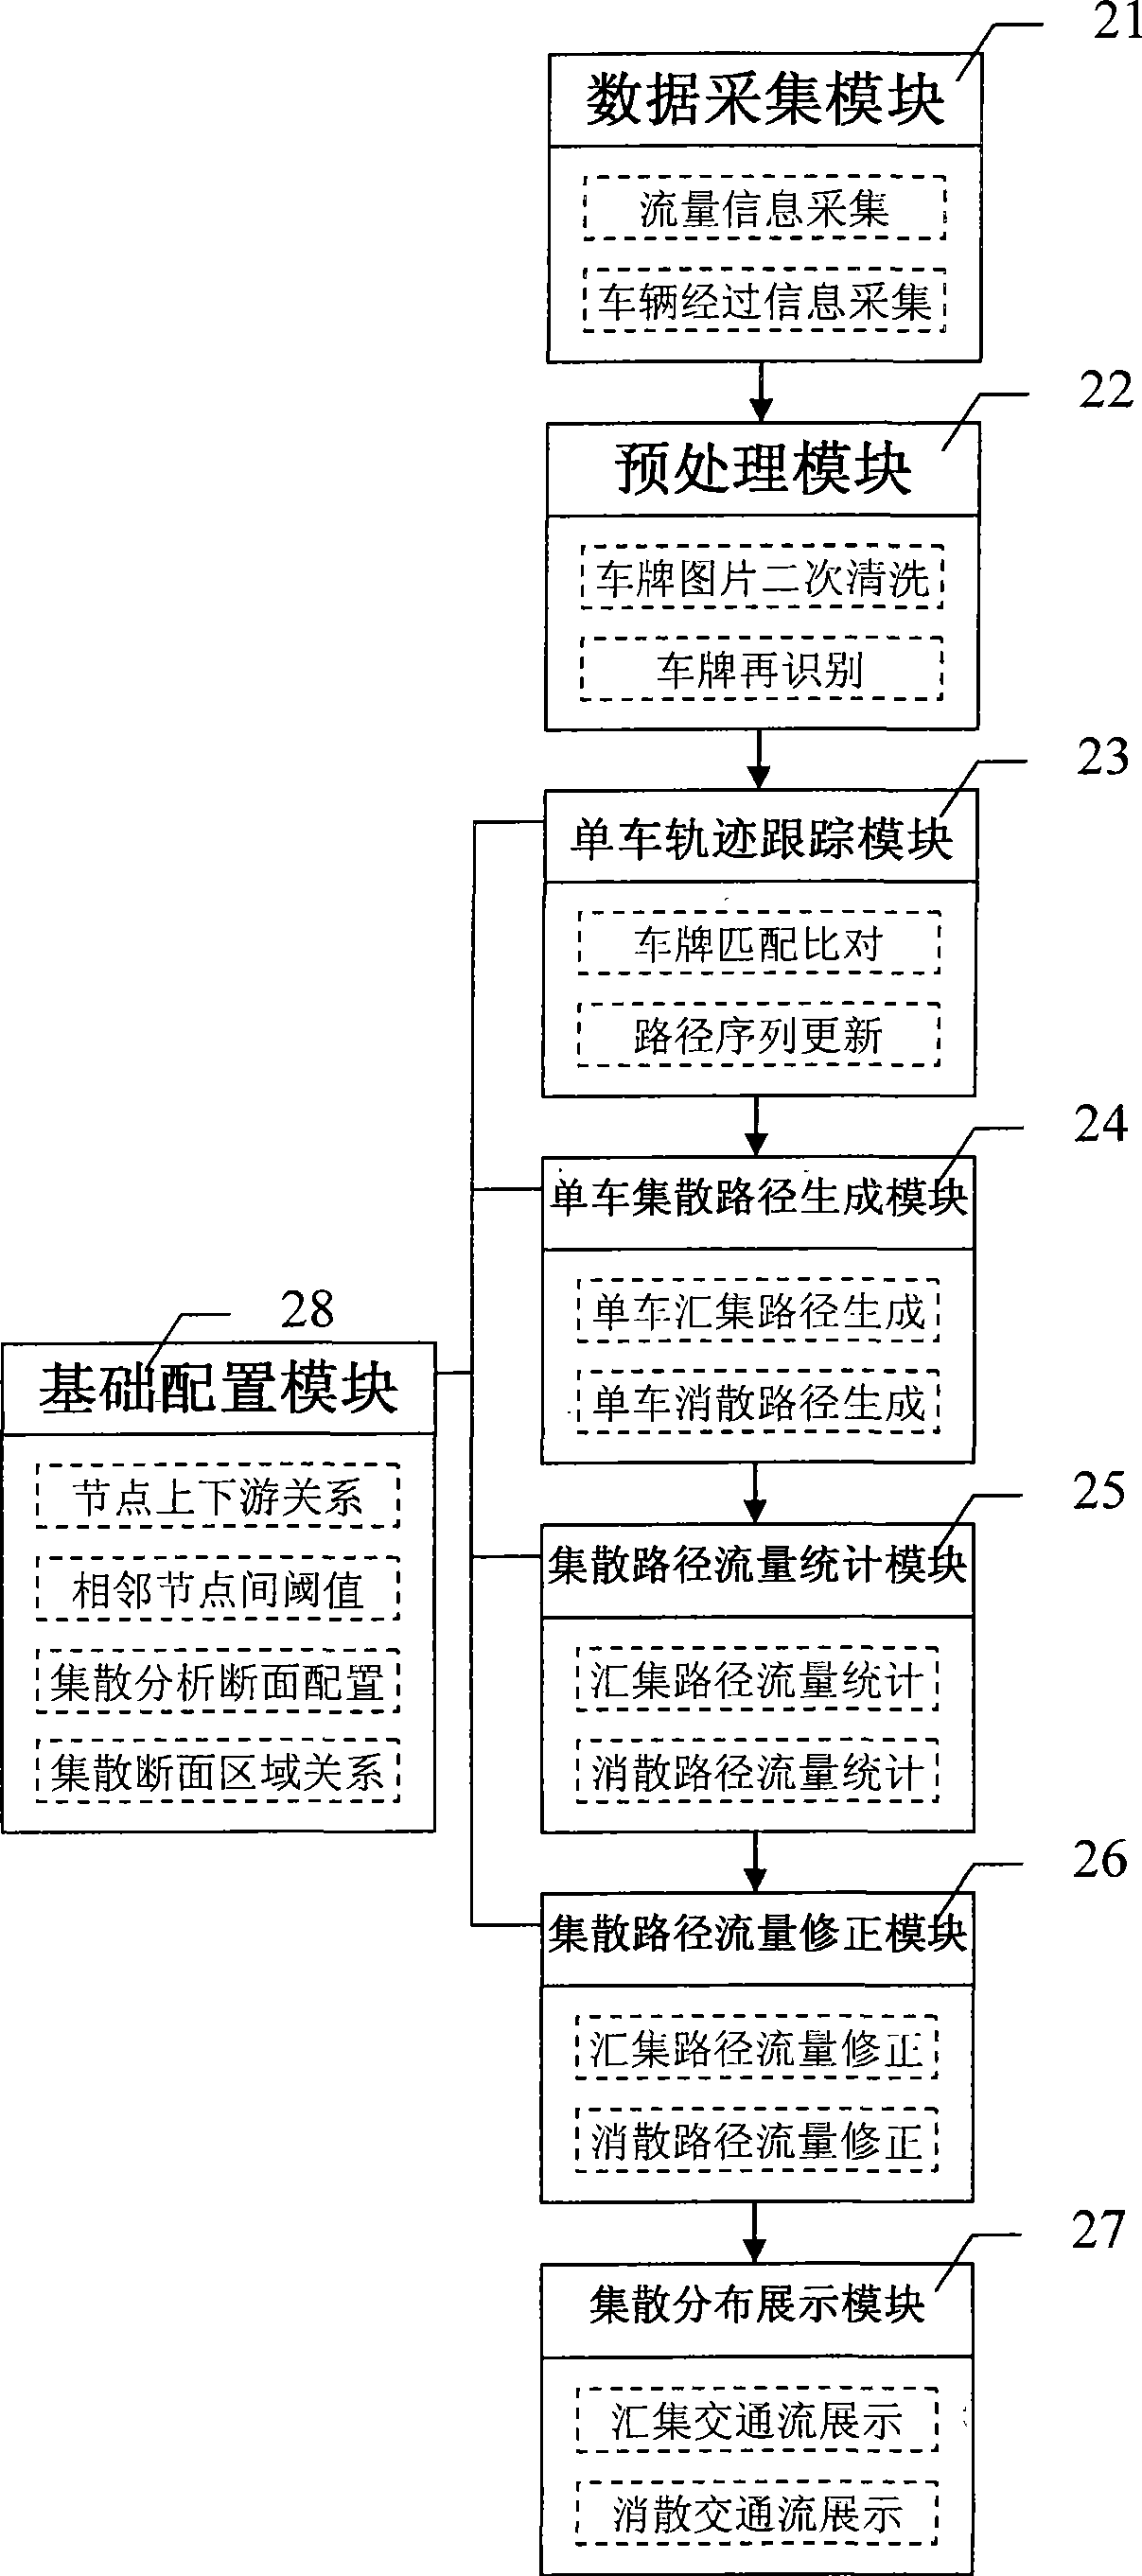 Traffic flow integrated and distributed analytic system based on license plate identification data and processing method thereof